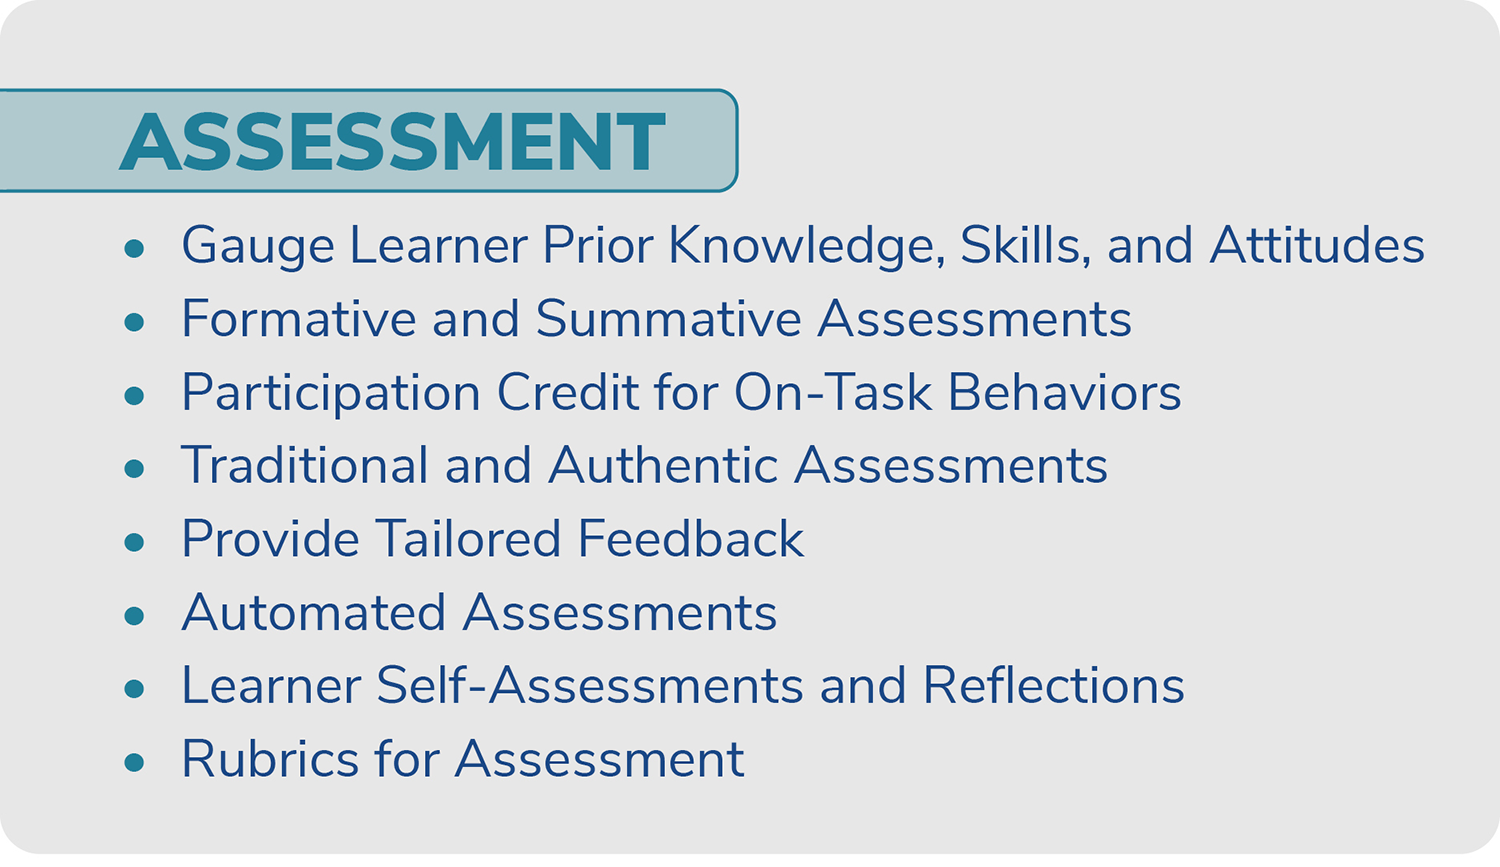 A bulleted list of the eight elements of the 'Assessment' dimension of the IDEAS Framework: Gauge Learner Prior Knowledge, Skills, and Attitudes; Formative and Summative Assessments; Participation Credit for On-Task Behaviors; Traditional and Authentic Assessments; Provide Tailored Feedback; Automated Assessments; Learner Self-Assessments and Reflections; and Rubrics for Assessment.